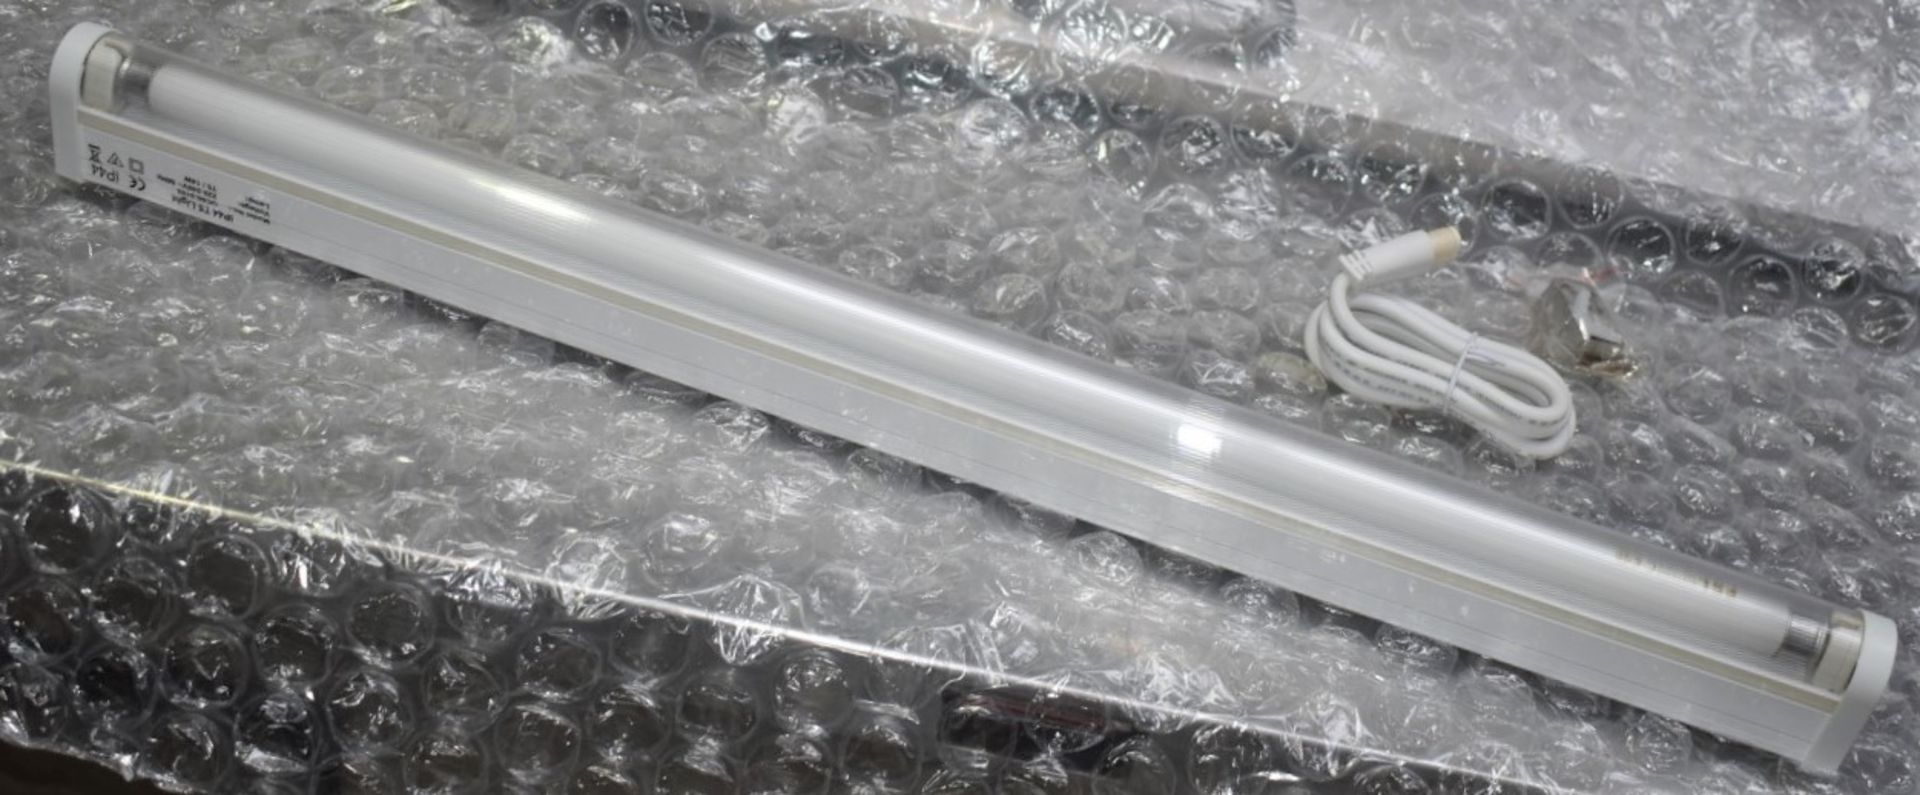 4 x Bathroom Light Fittings - IP44 Waterproof T5 14w Fluorescent Lights With Built-In Electronic - Image 2 of 11